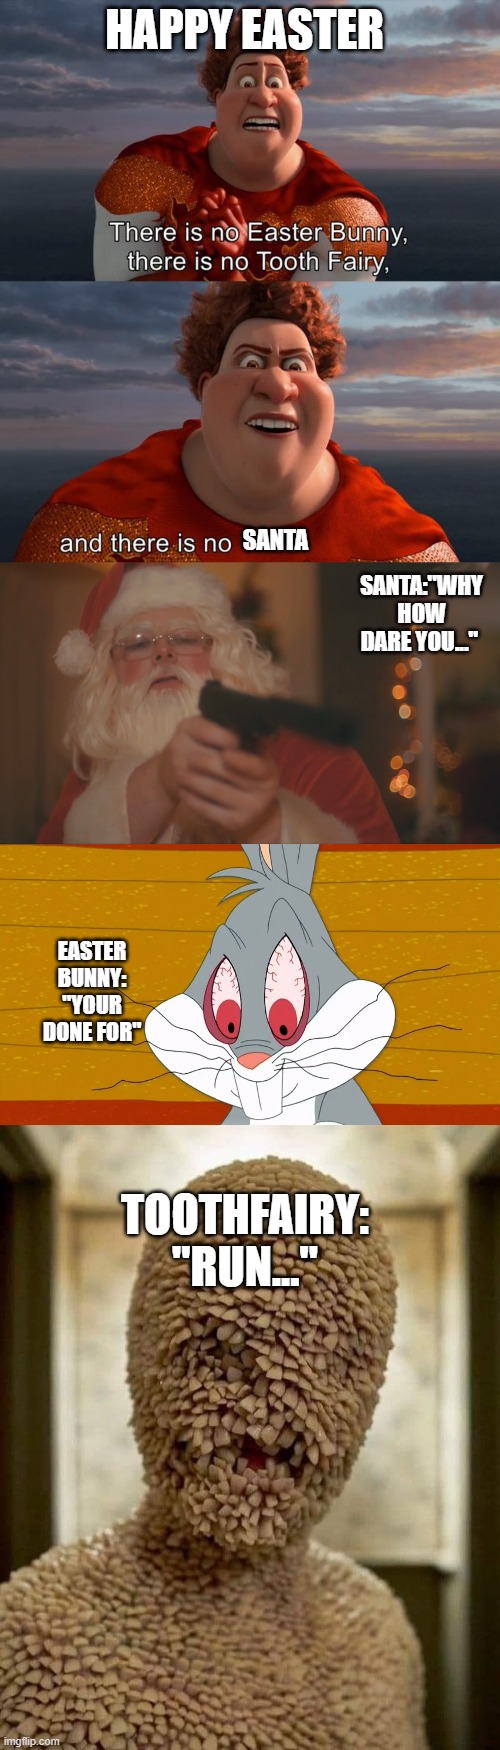 your done sir | HAPPY EASTER; SANTA; SANTA:"WHY HOW DARE YOU..."; EASTER BUNNY: "YOUR DONE FOR"; TOOTHFAIRY: "RUN..." | image tagged in there is no easter bunny there is no tooh fairy,santa kills,angry buggs bunny,tooth fairy | made w/ Imgflip meme maker